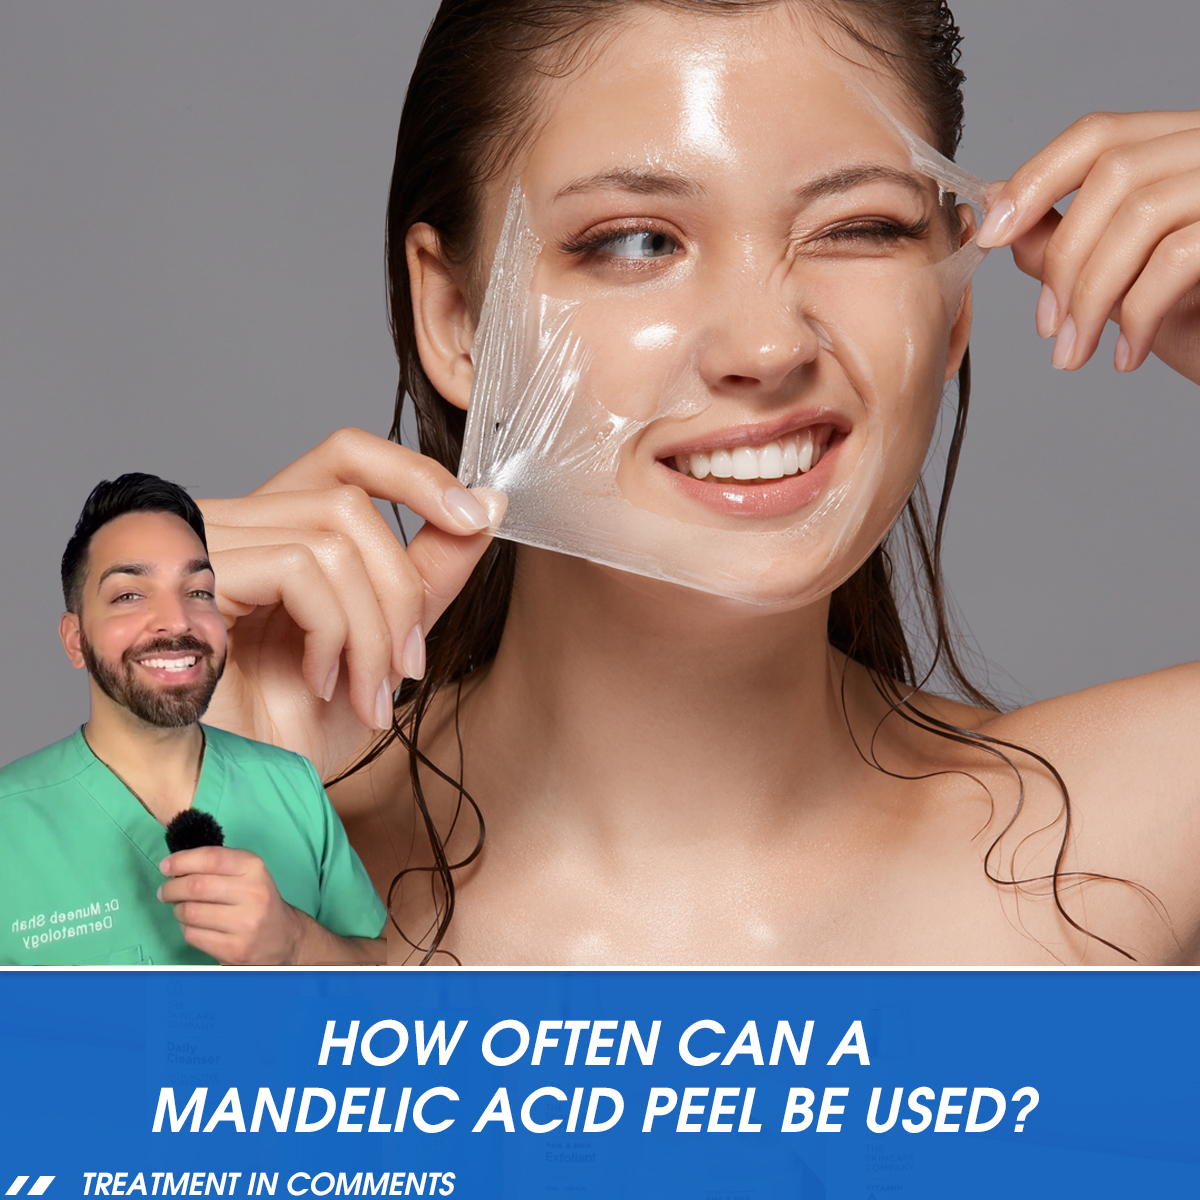 How often can a mandelic acid peel be used?